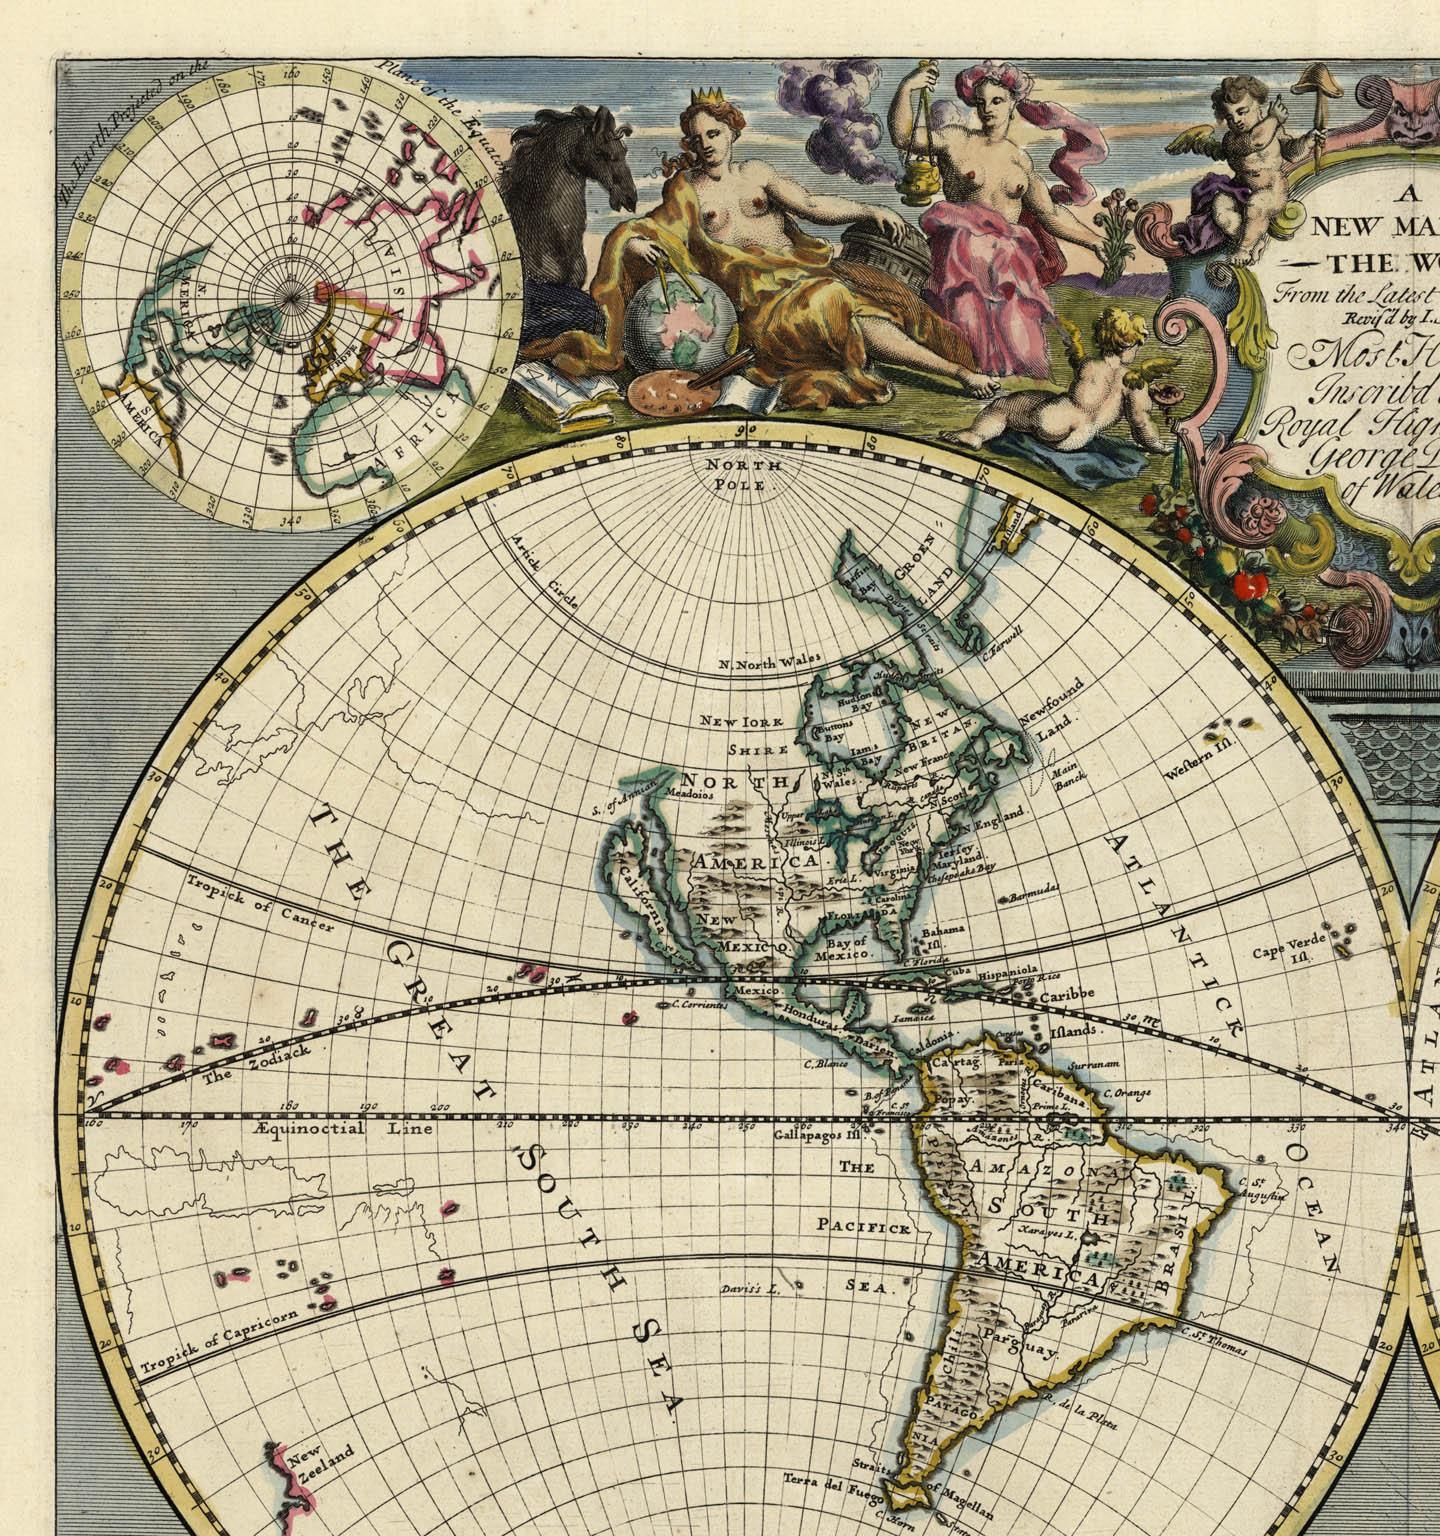 A NEW MAP OF THE WORLD from the Latest Observations.  - Print by John Senex